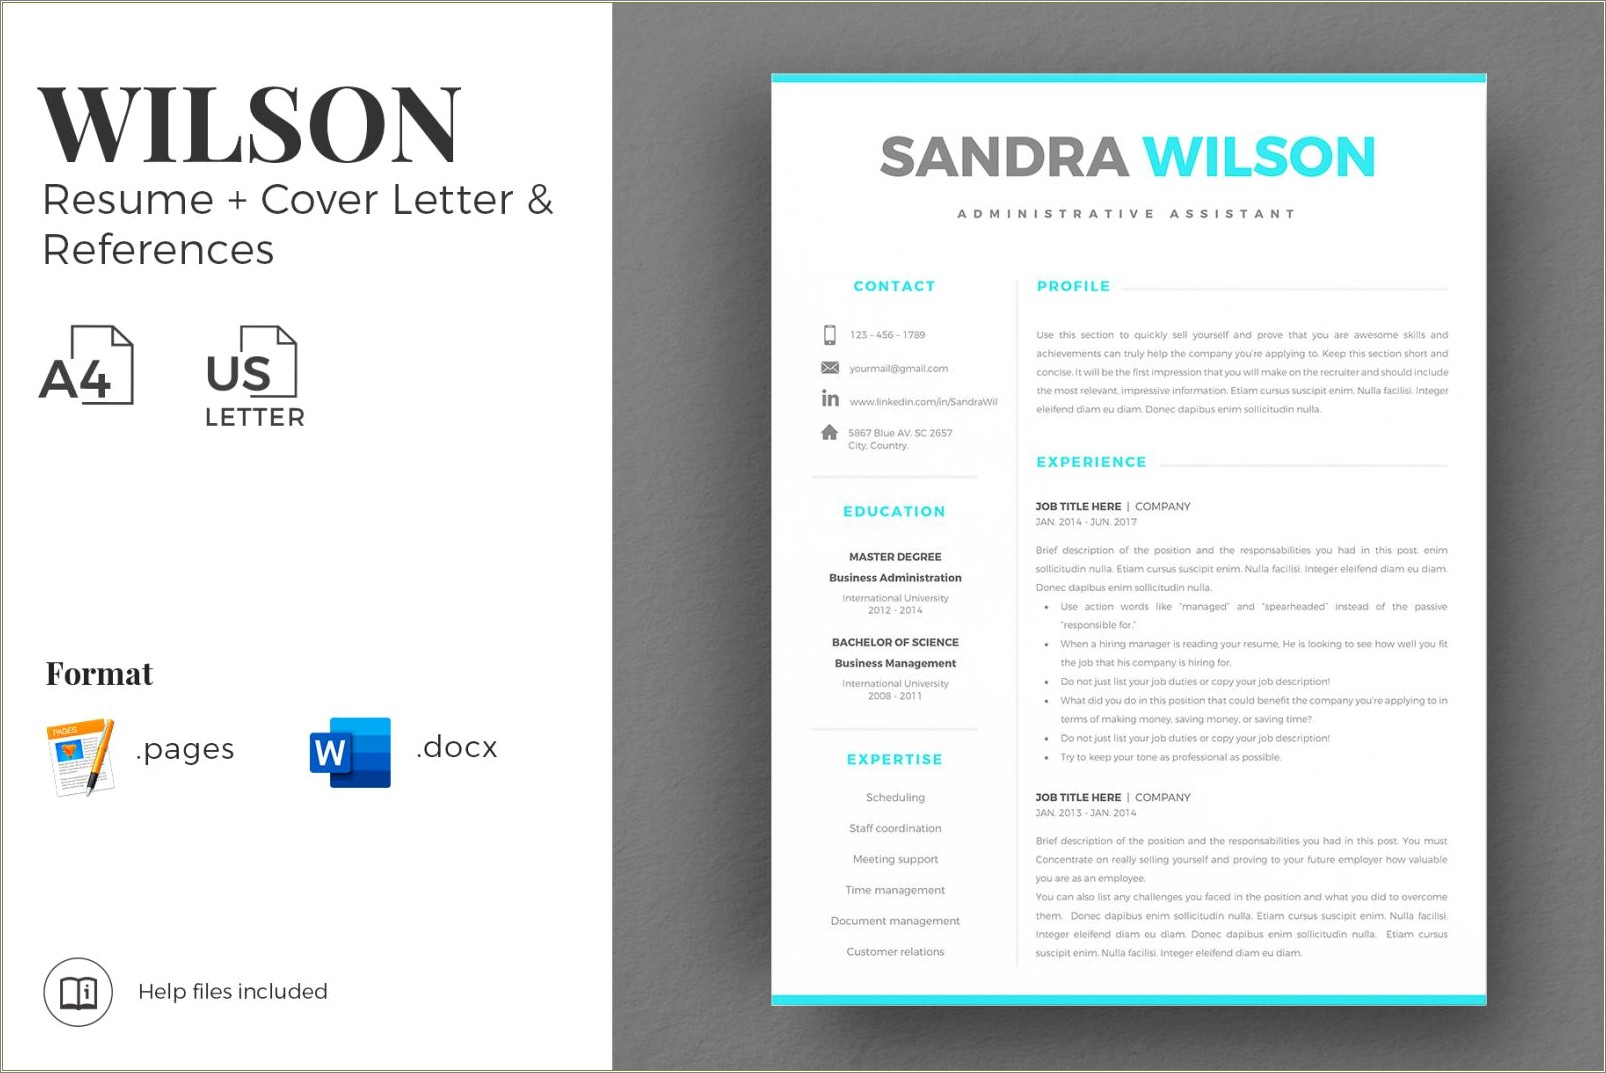 Include Cover Letter In Resume Or Separately